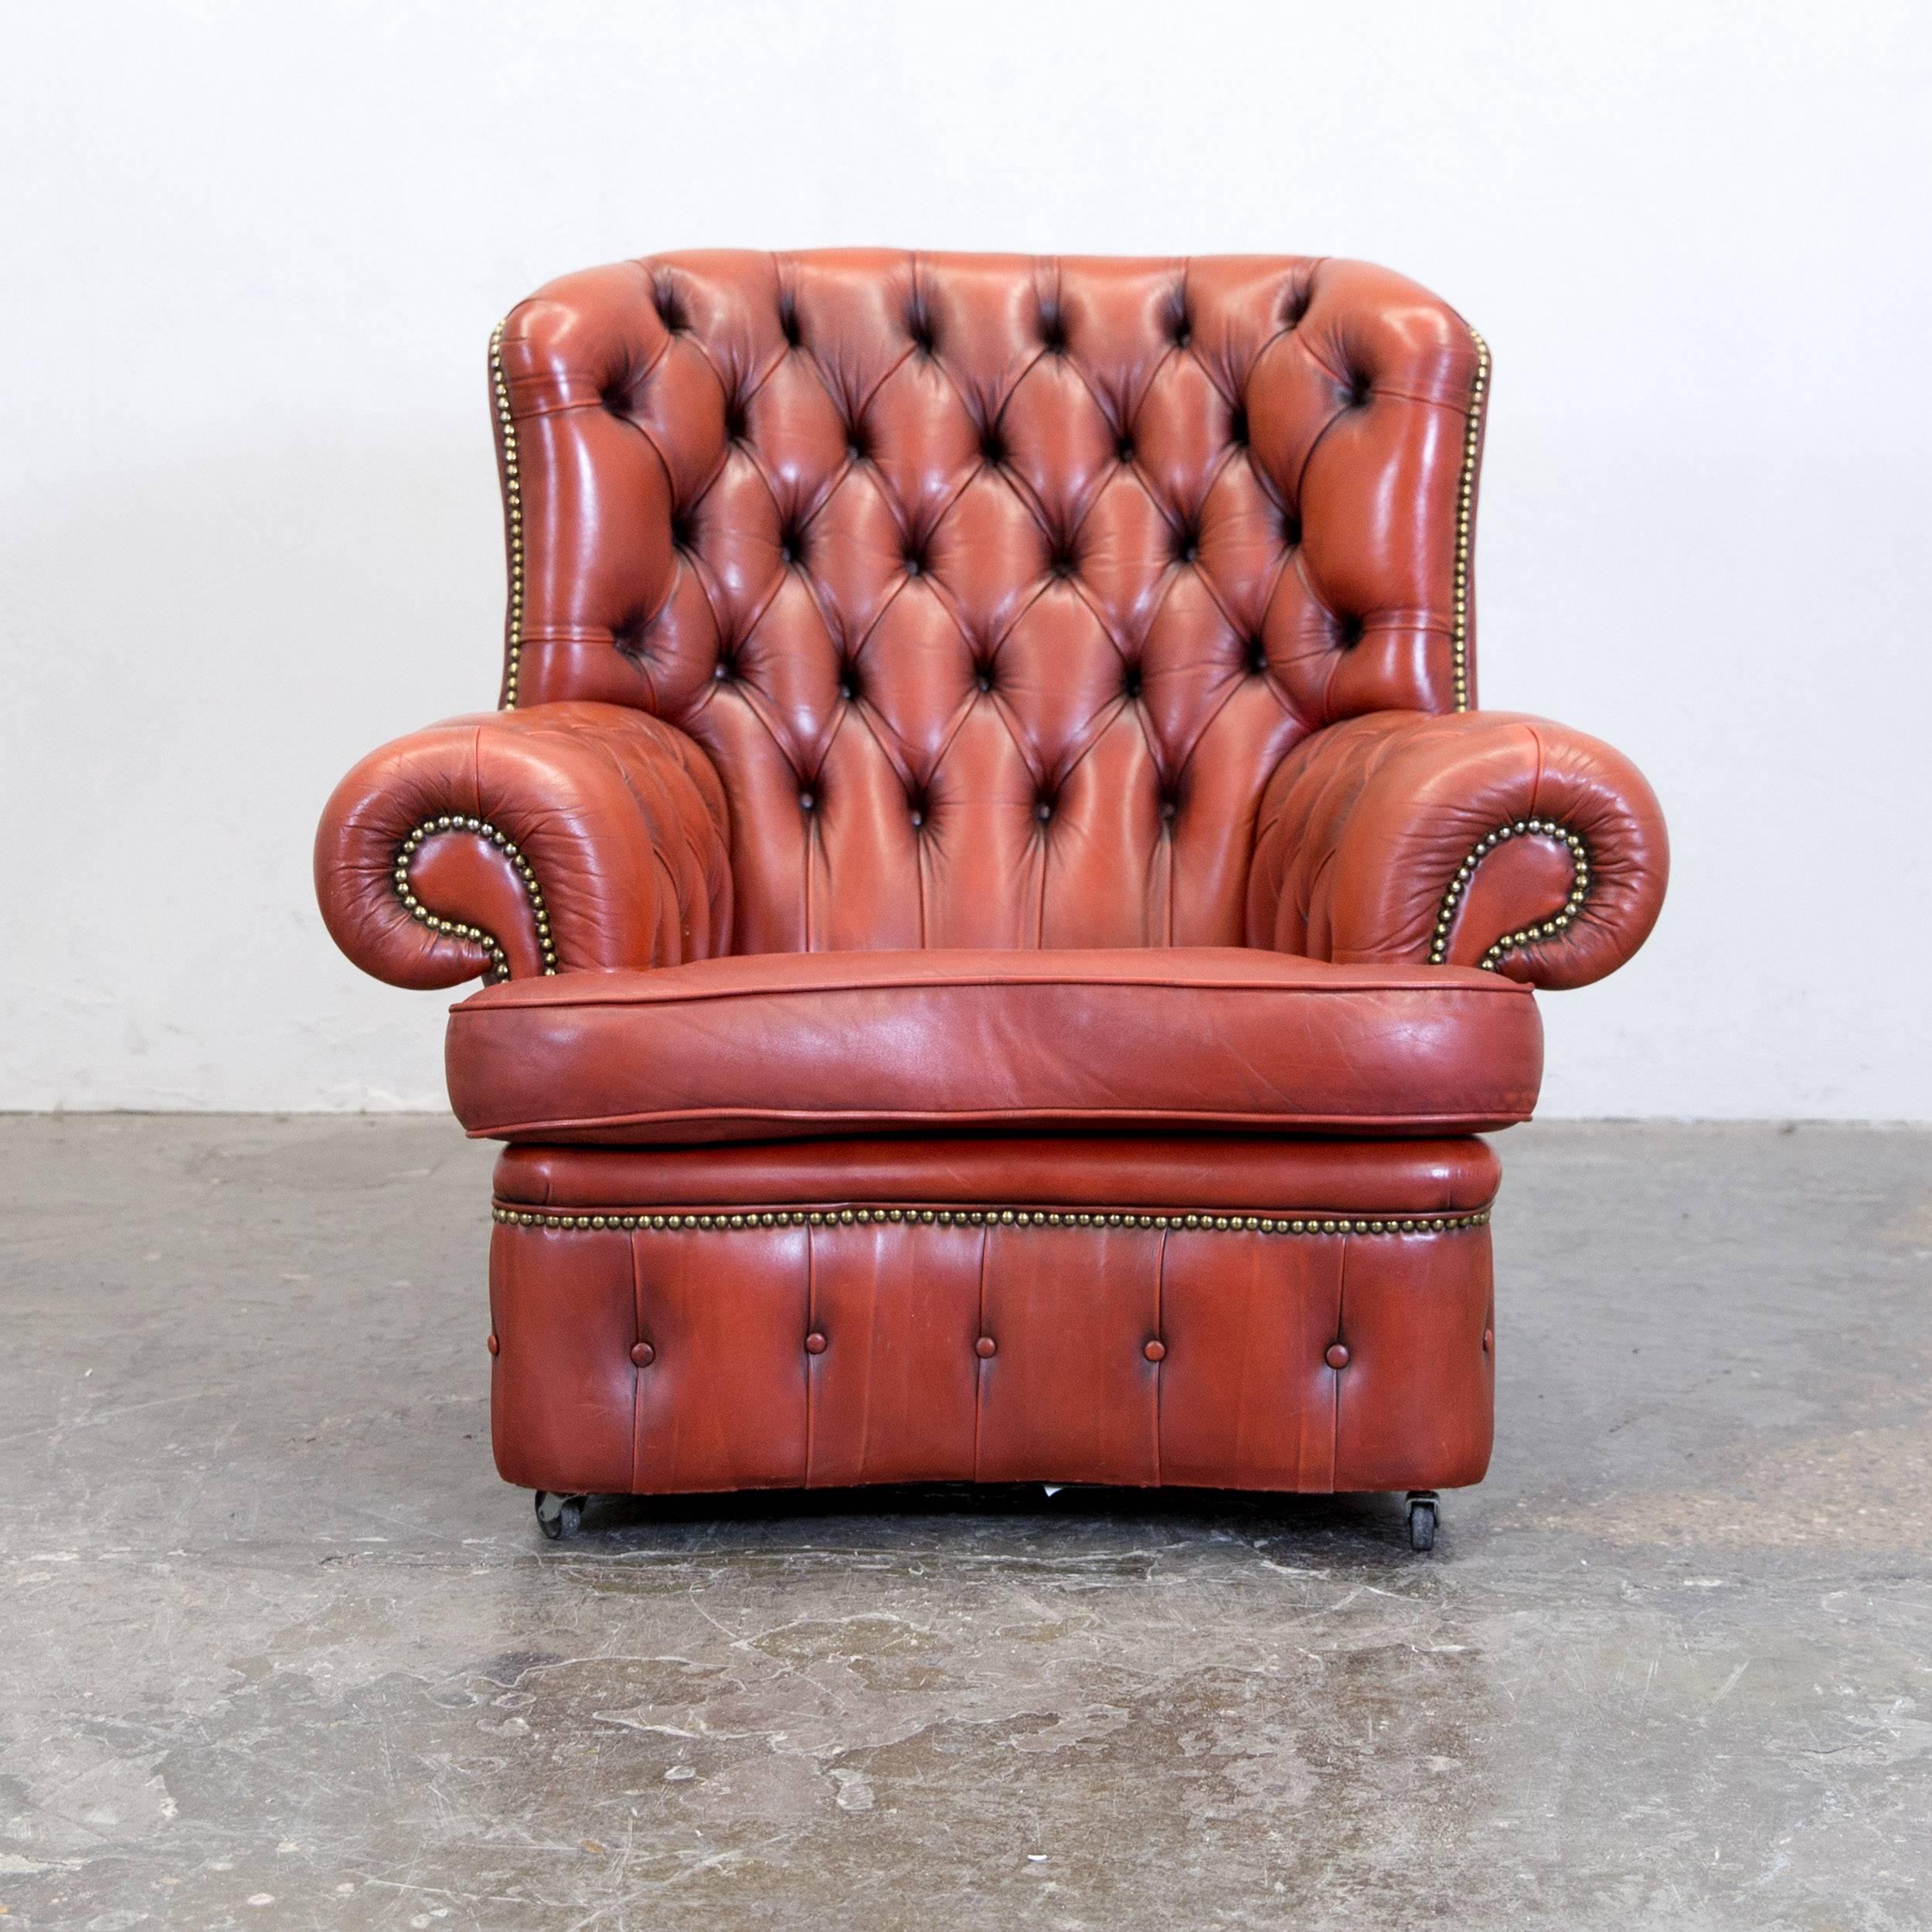 Chesterfield leather brown orange one seat vintage retro rivets armchair, in a vintage design, made for pure comfort.